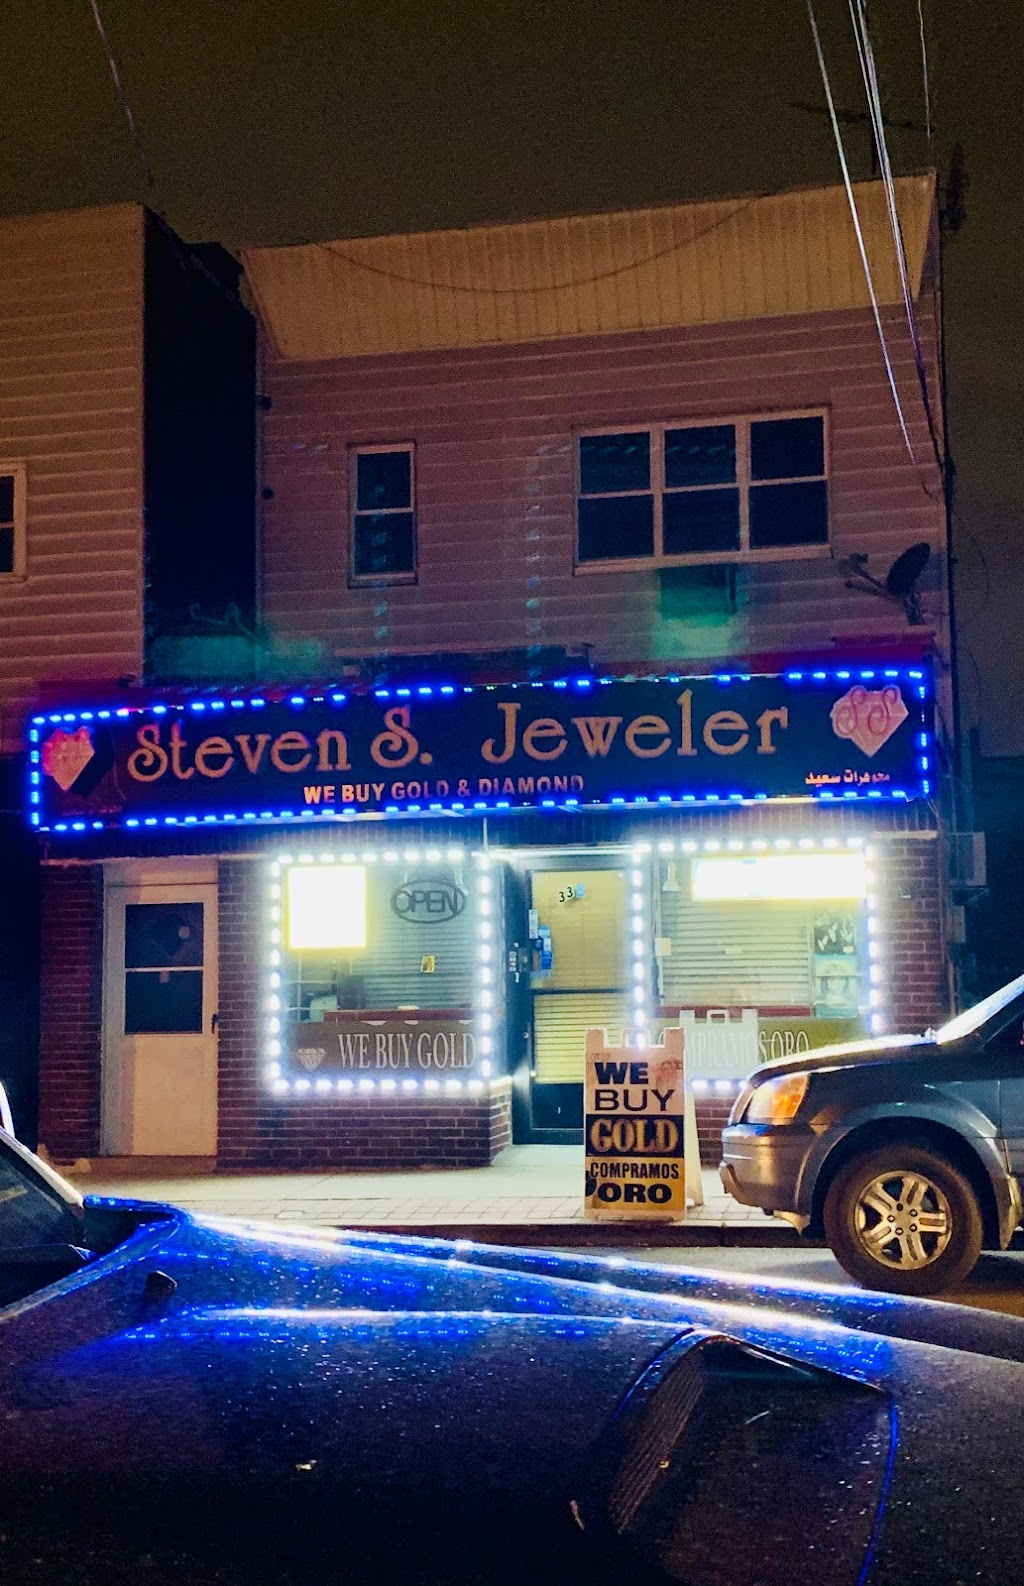 Steven S Jewelry | 33 Anderson Ave, Fairview, NJ 07022 | Phone: (201) 840-5900